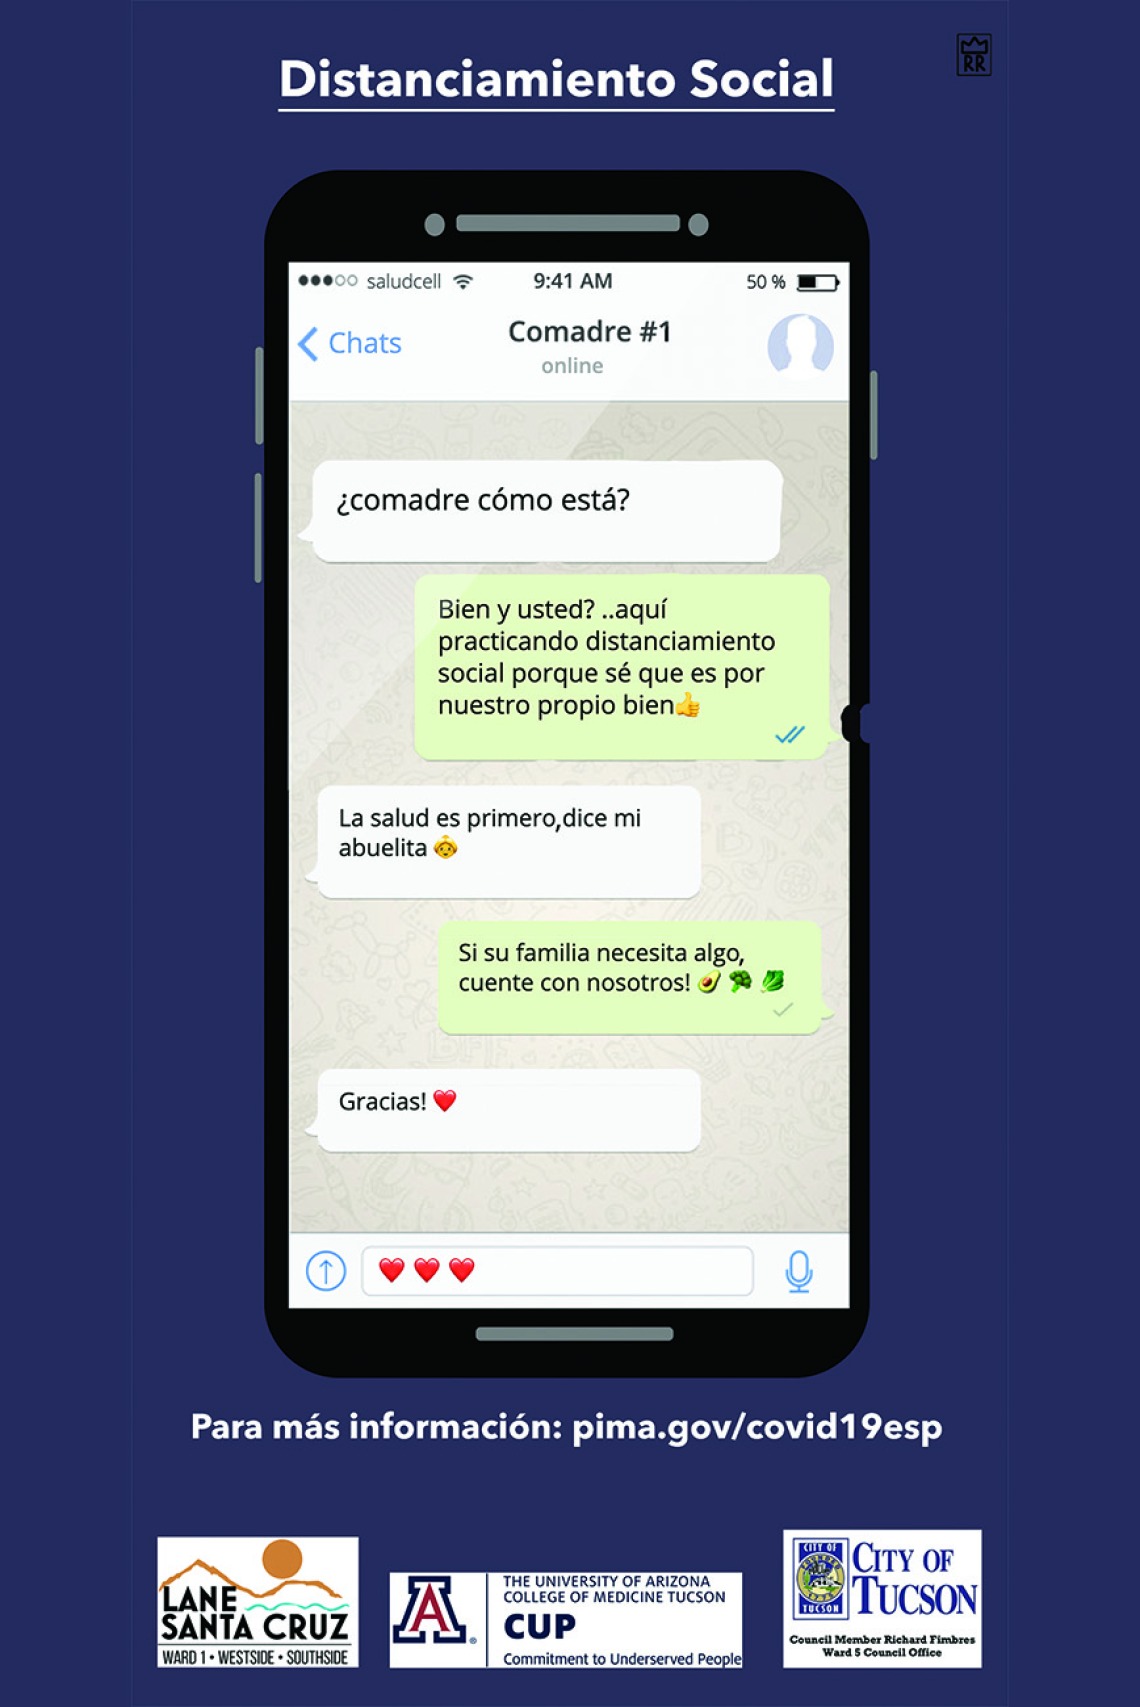 WhatsApp is a popular way to communicate with people who live in different countries, here’s an example of a model conversation about social distancing to protect those we love.